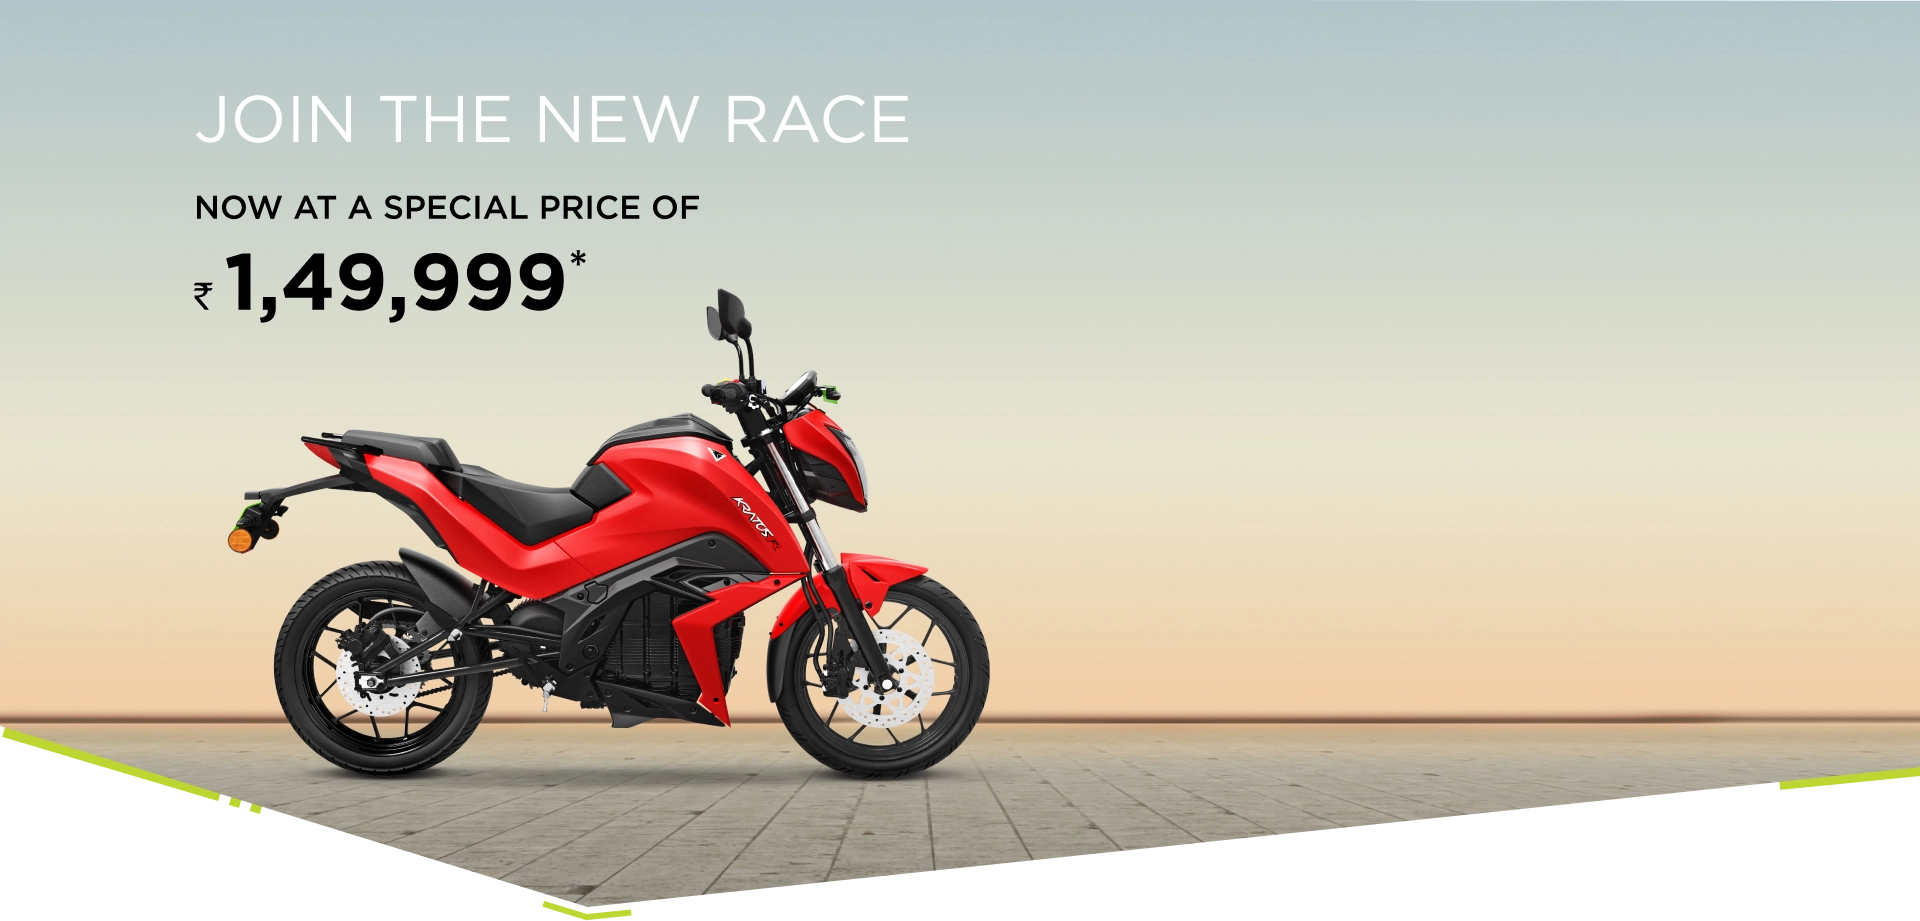 Get Up To ¥22,000*/-Off On India's Highest-Rated* Electric Motorcycle. Hurry, Limited-Period Offer